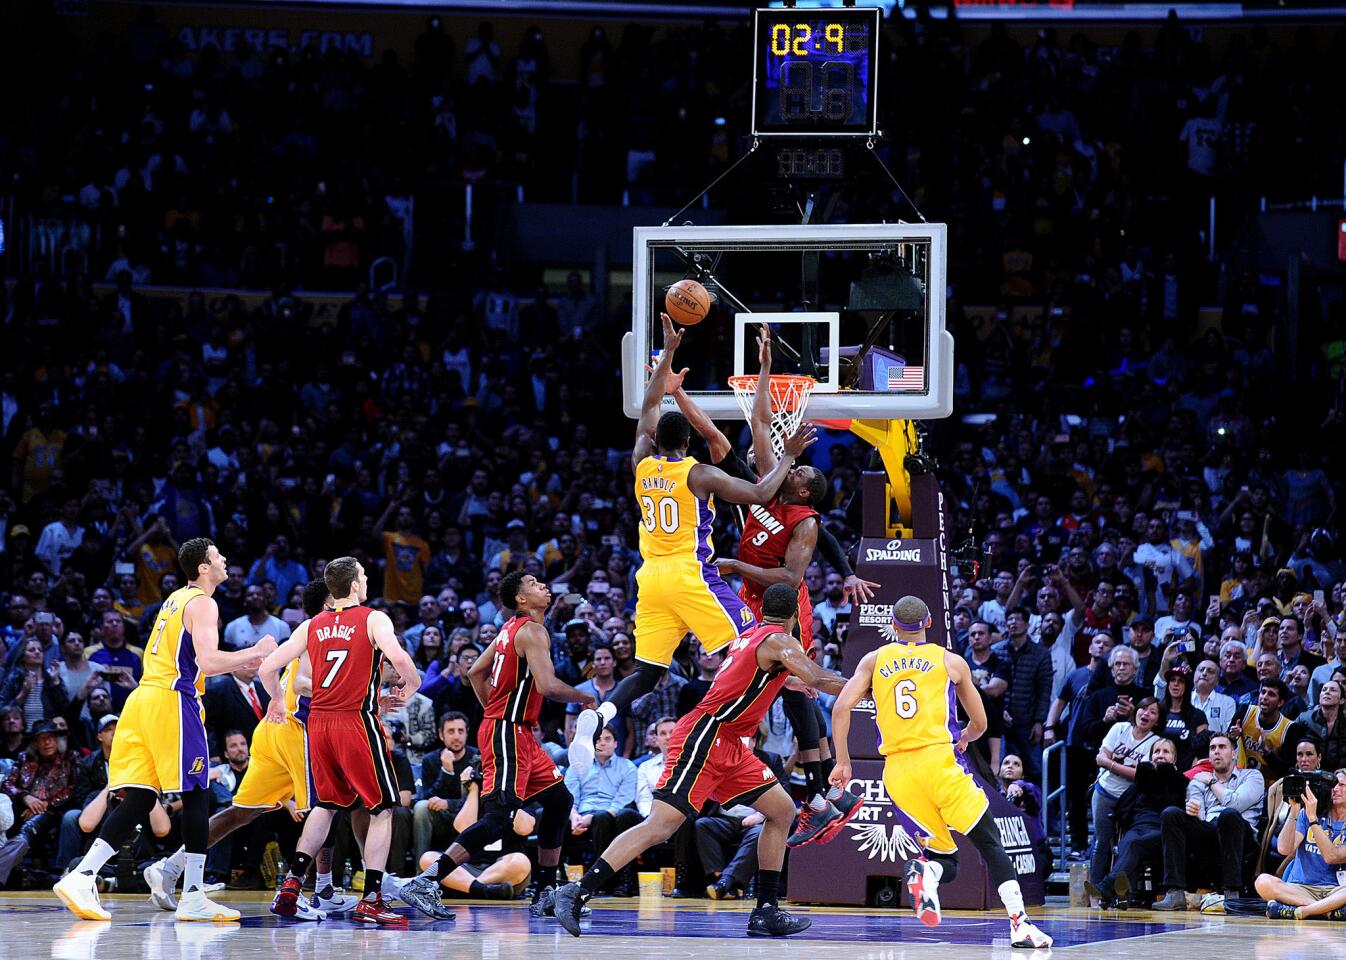 Julius Randle hits game-winner to push Lakers to overtime win against Heat